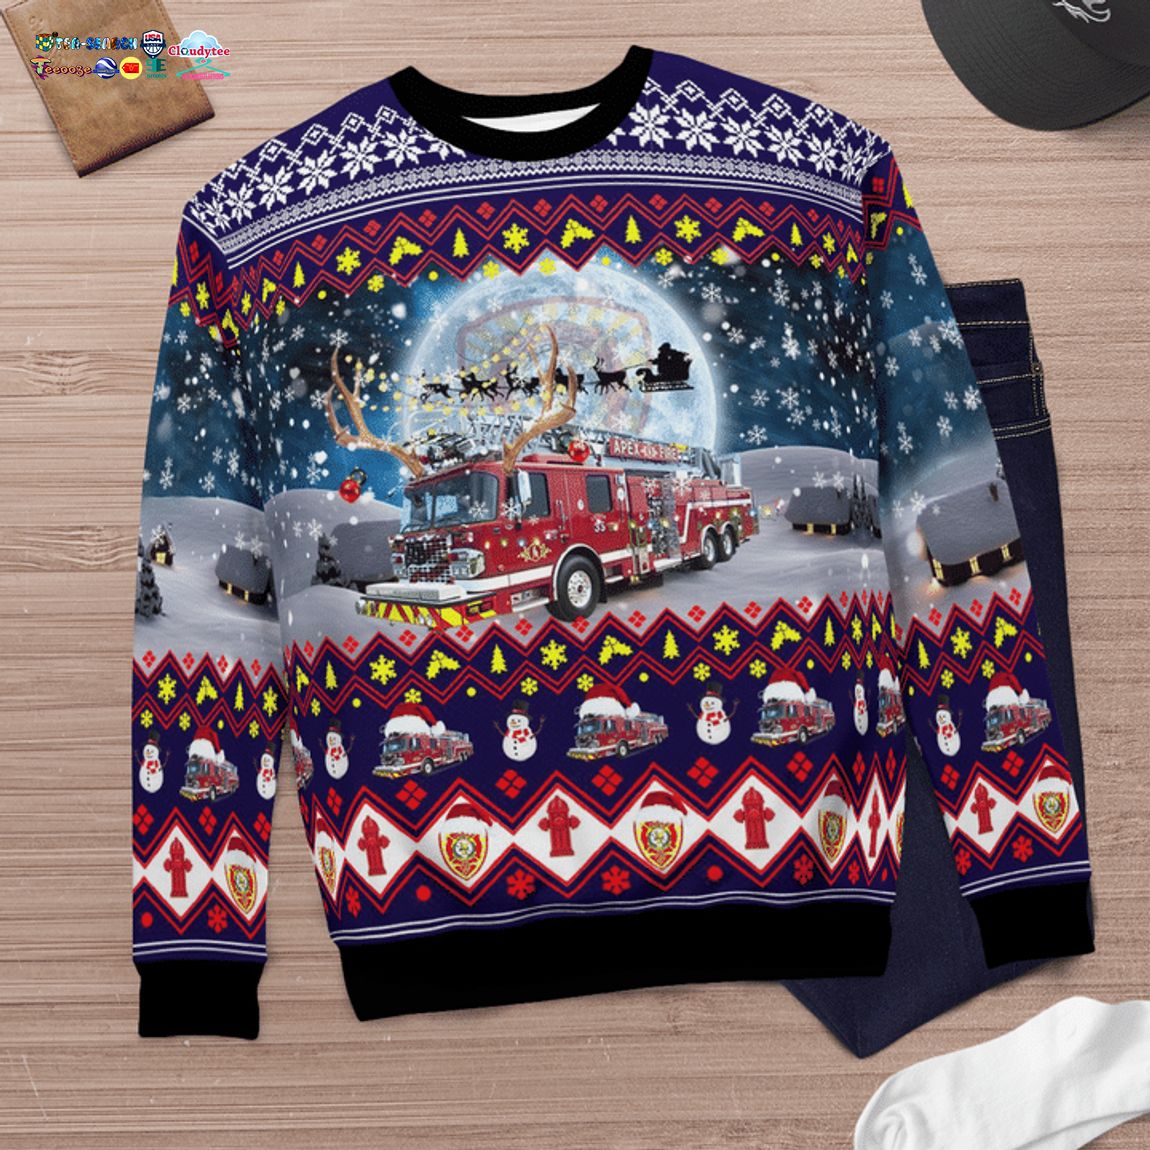 North Carolina Town of Apex Fire Department 3D Christmas Sweater